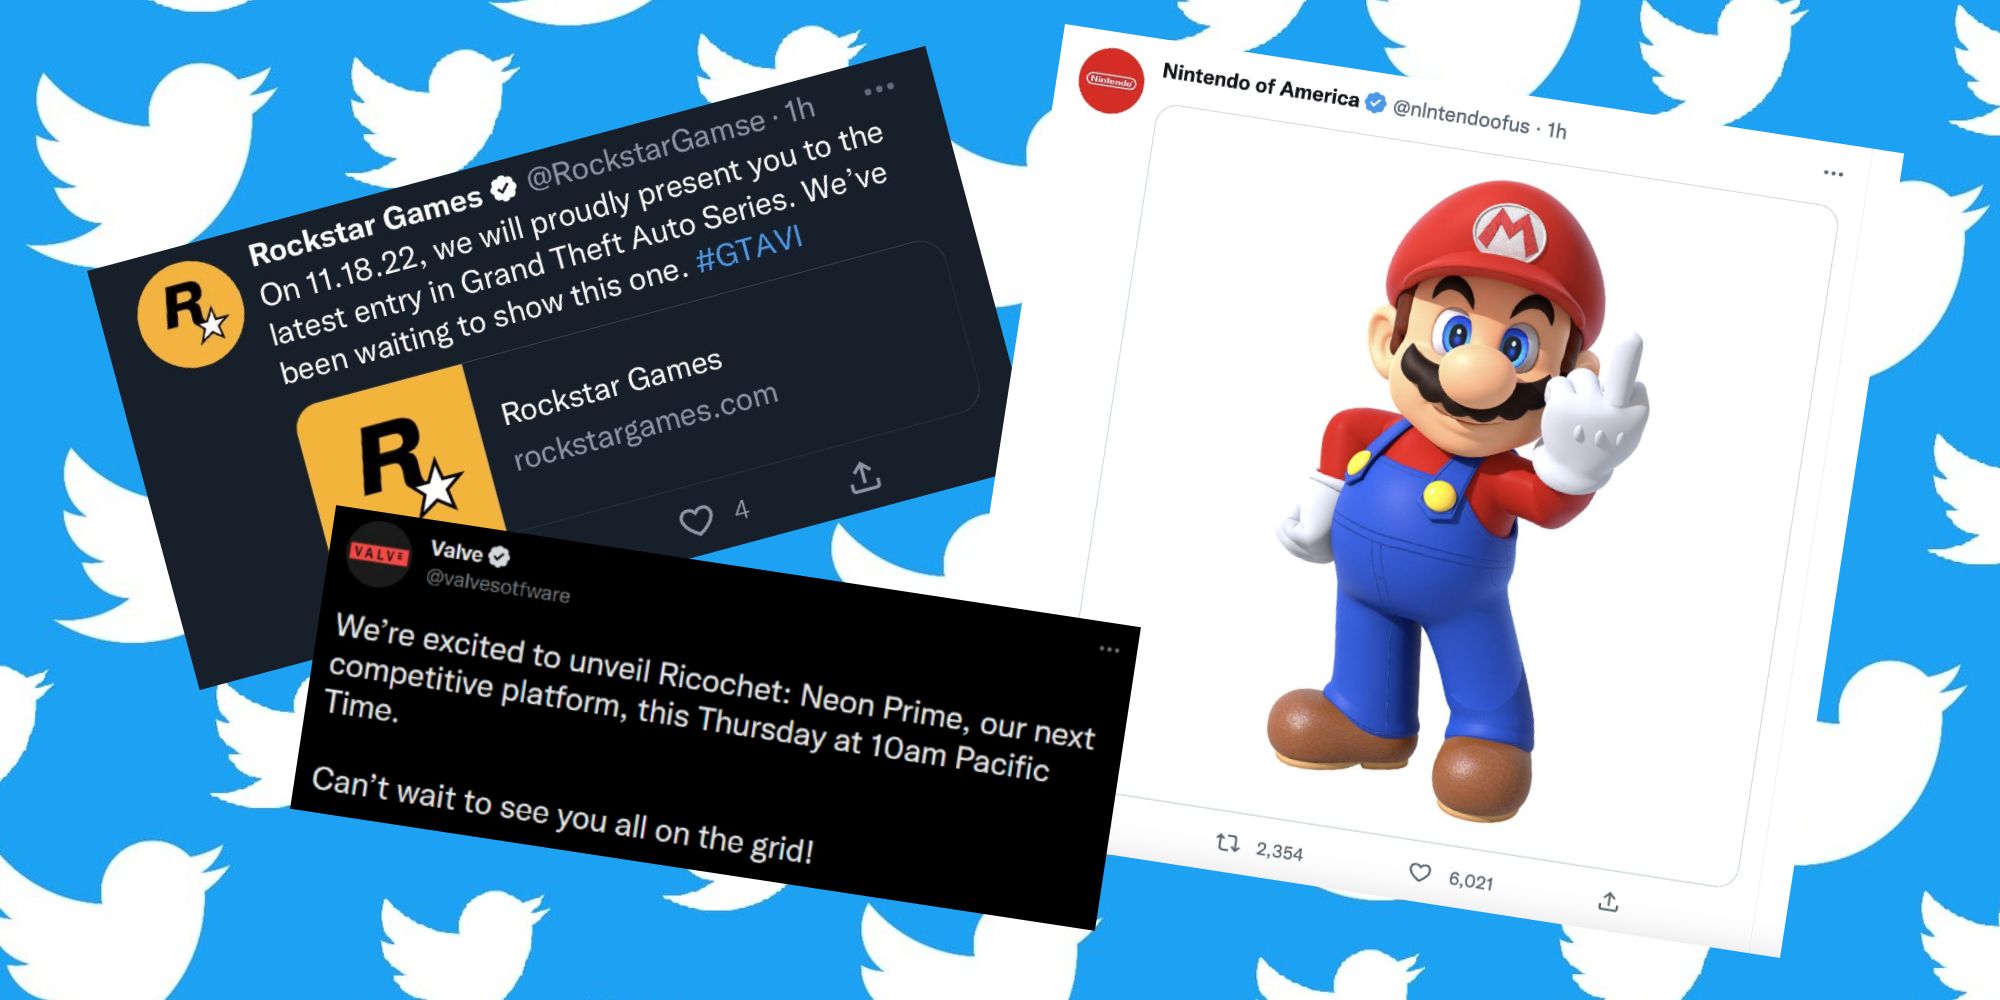 Twitter users impersonating Rockstar, Valve, and Nintendo of America